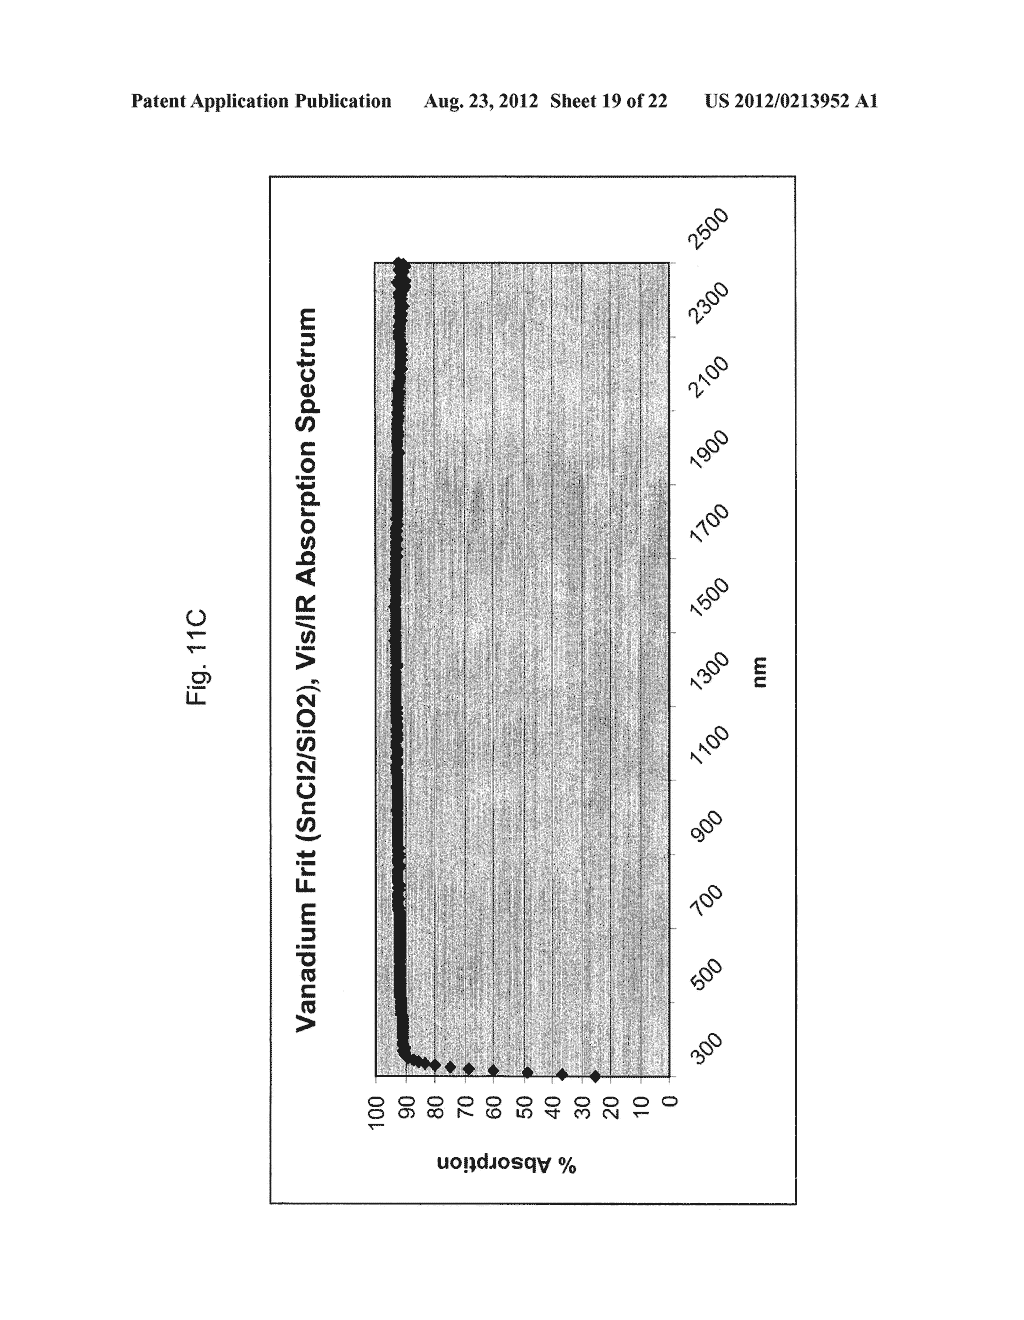 VANADIUM-BASED FRIT MATERIALS, AND/OR METHODS OF MAKING THE SAME - diagram, schematic, and image 20